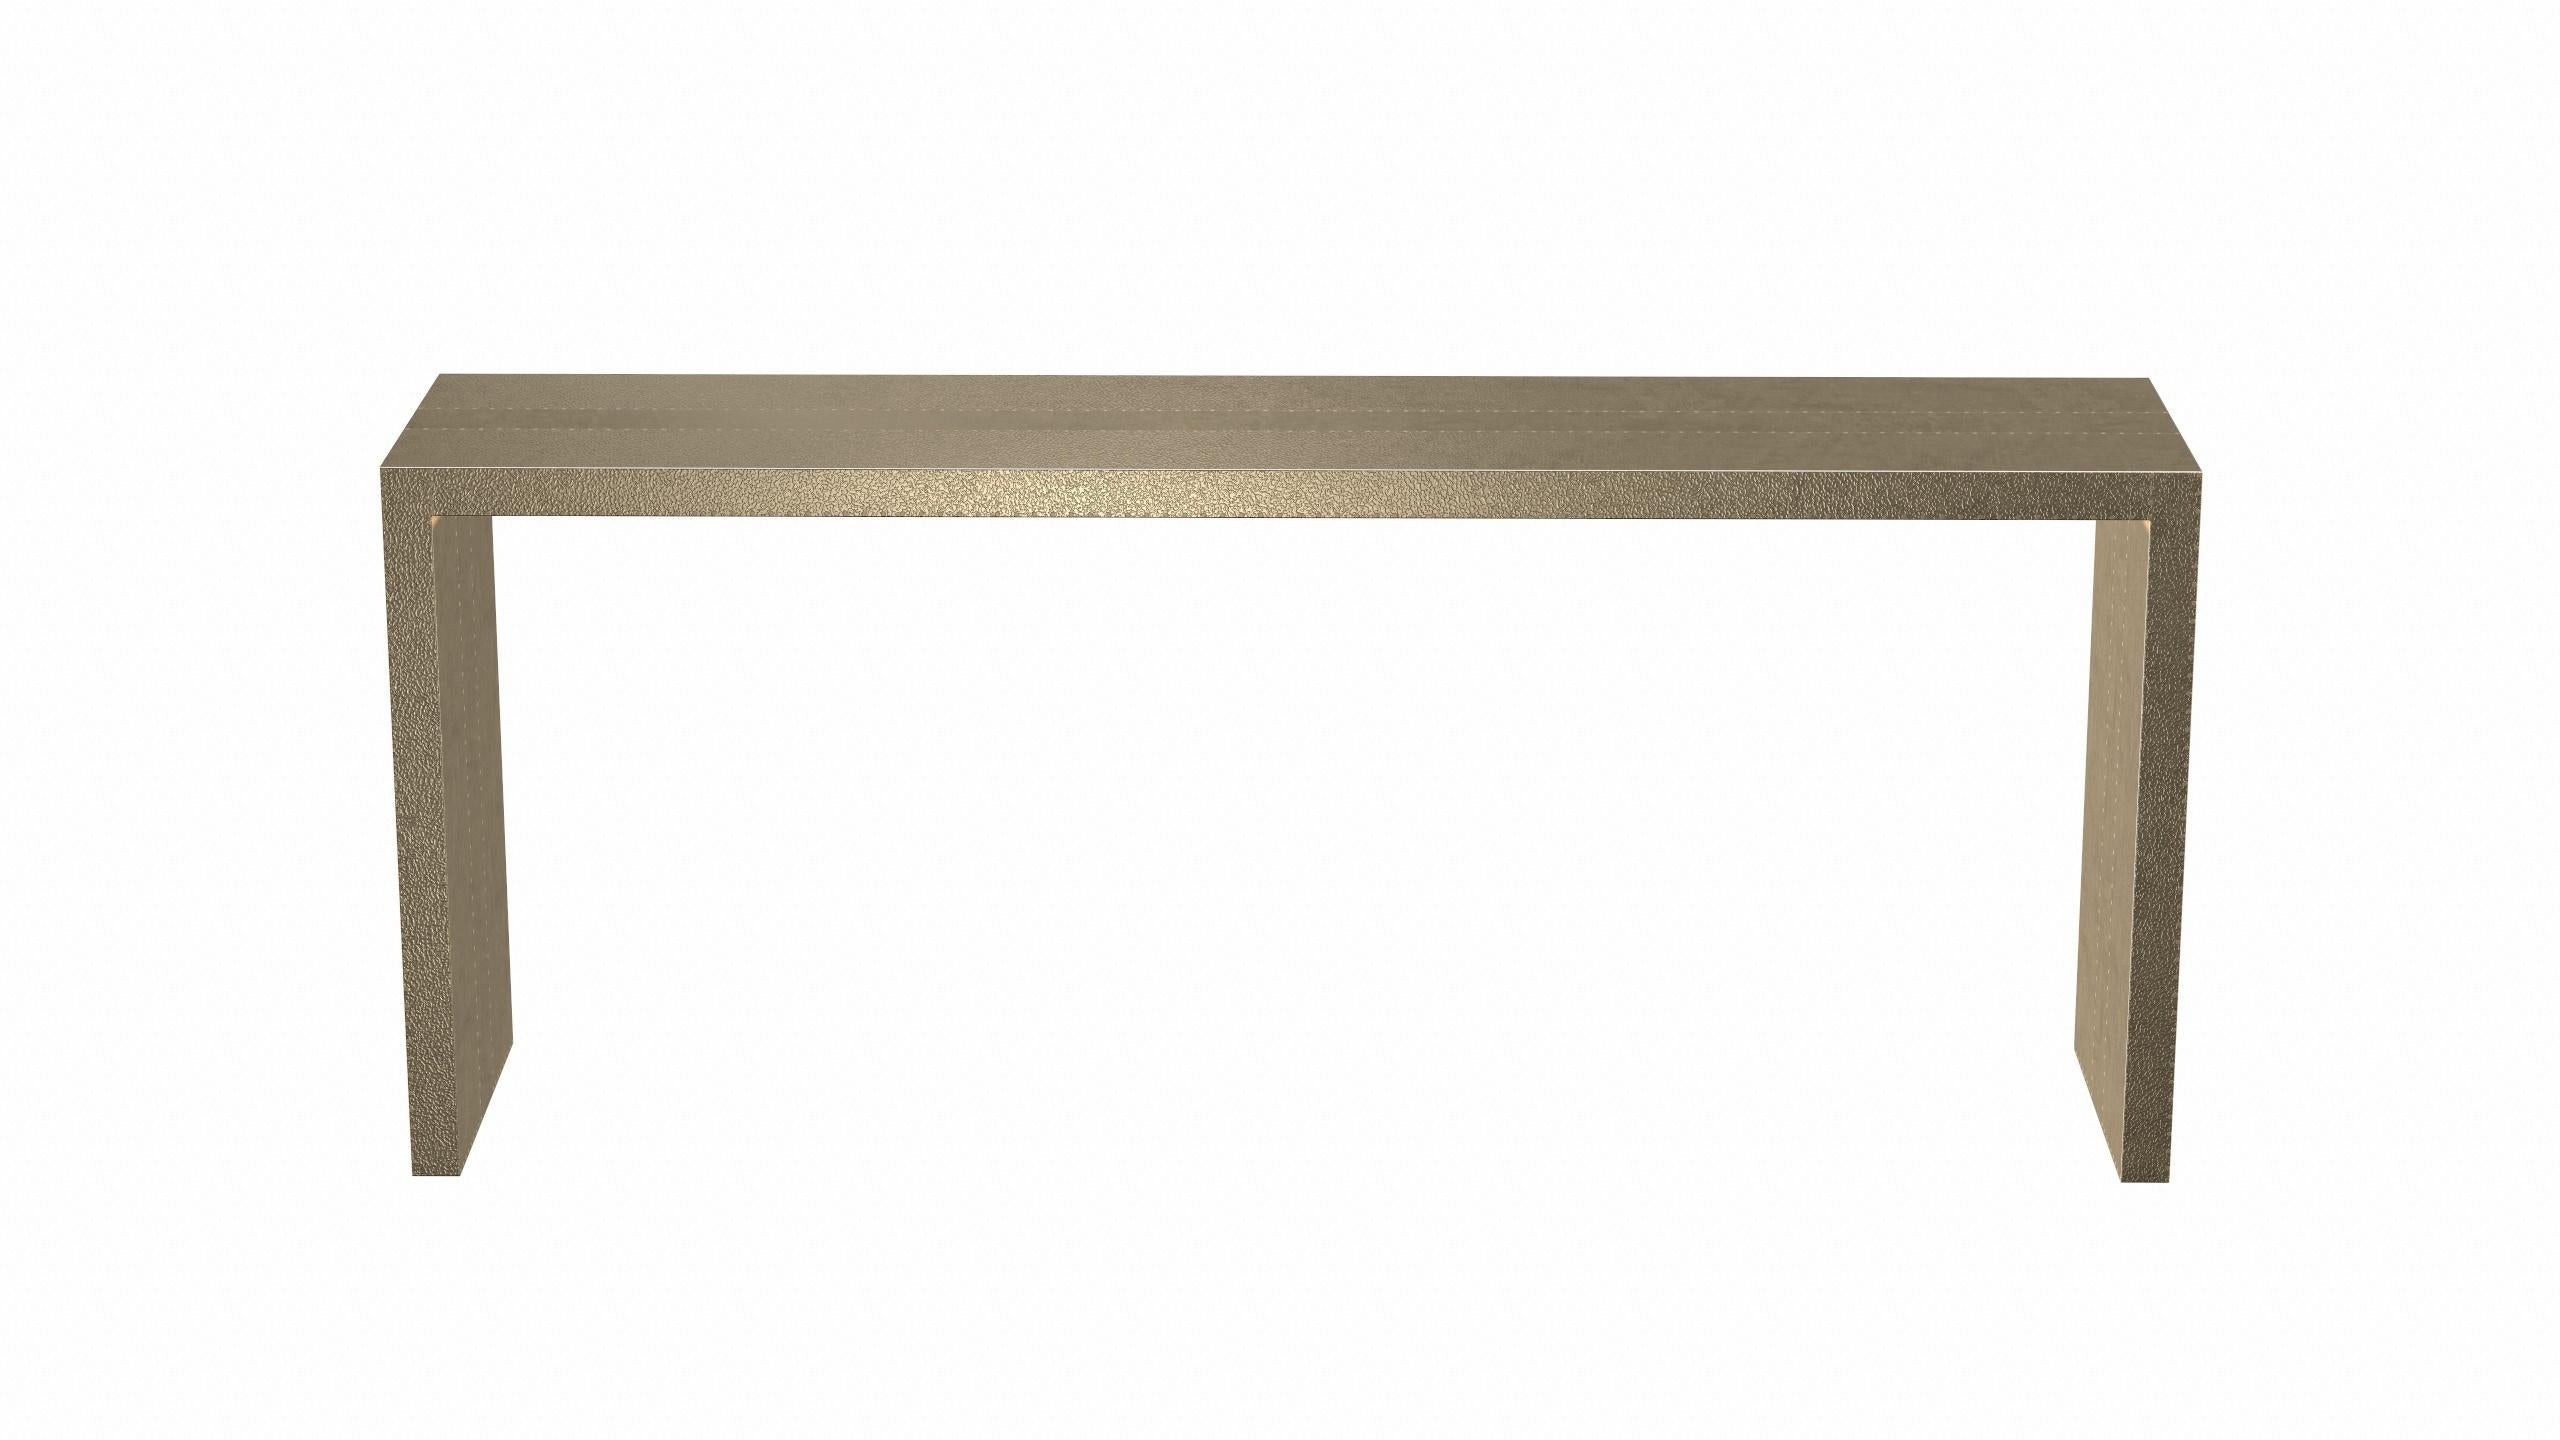 Hand-Carved Art Deco Rectangular Console Tables Fine Hammered Brass by Alison Spear For Sale